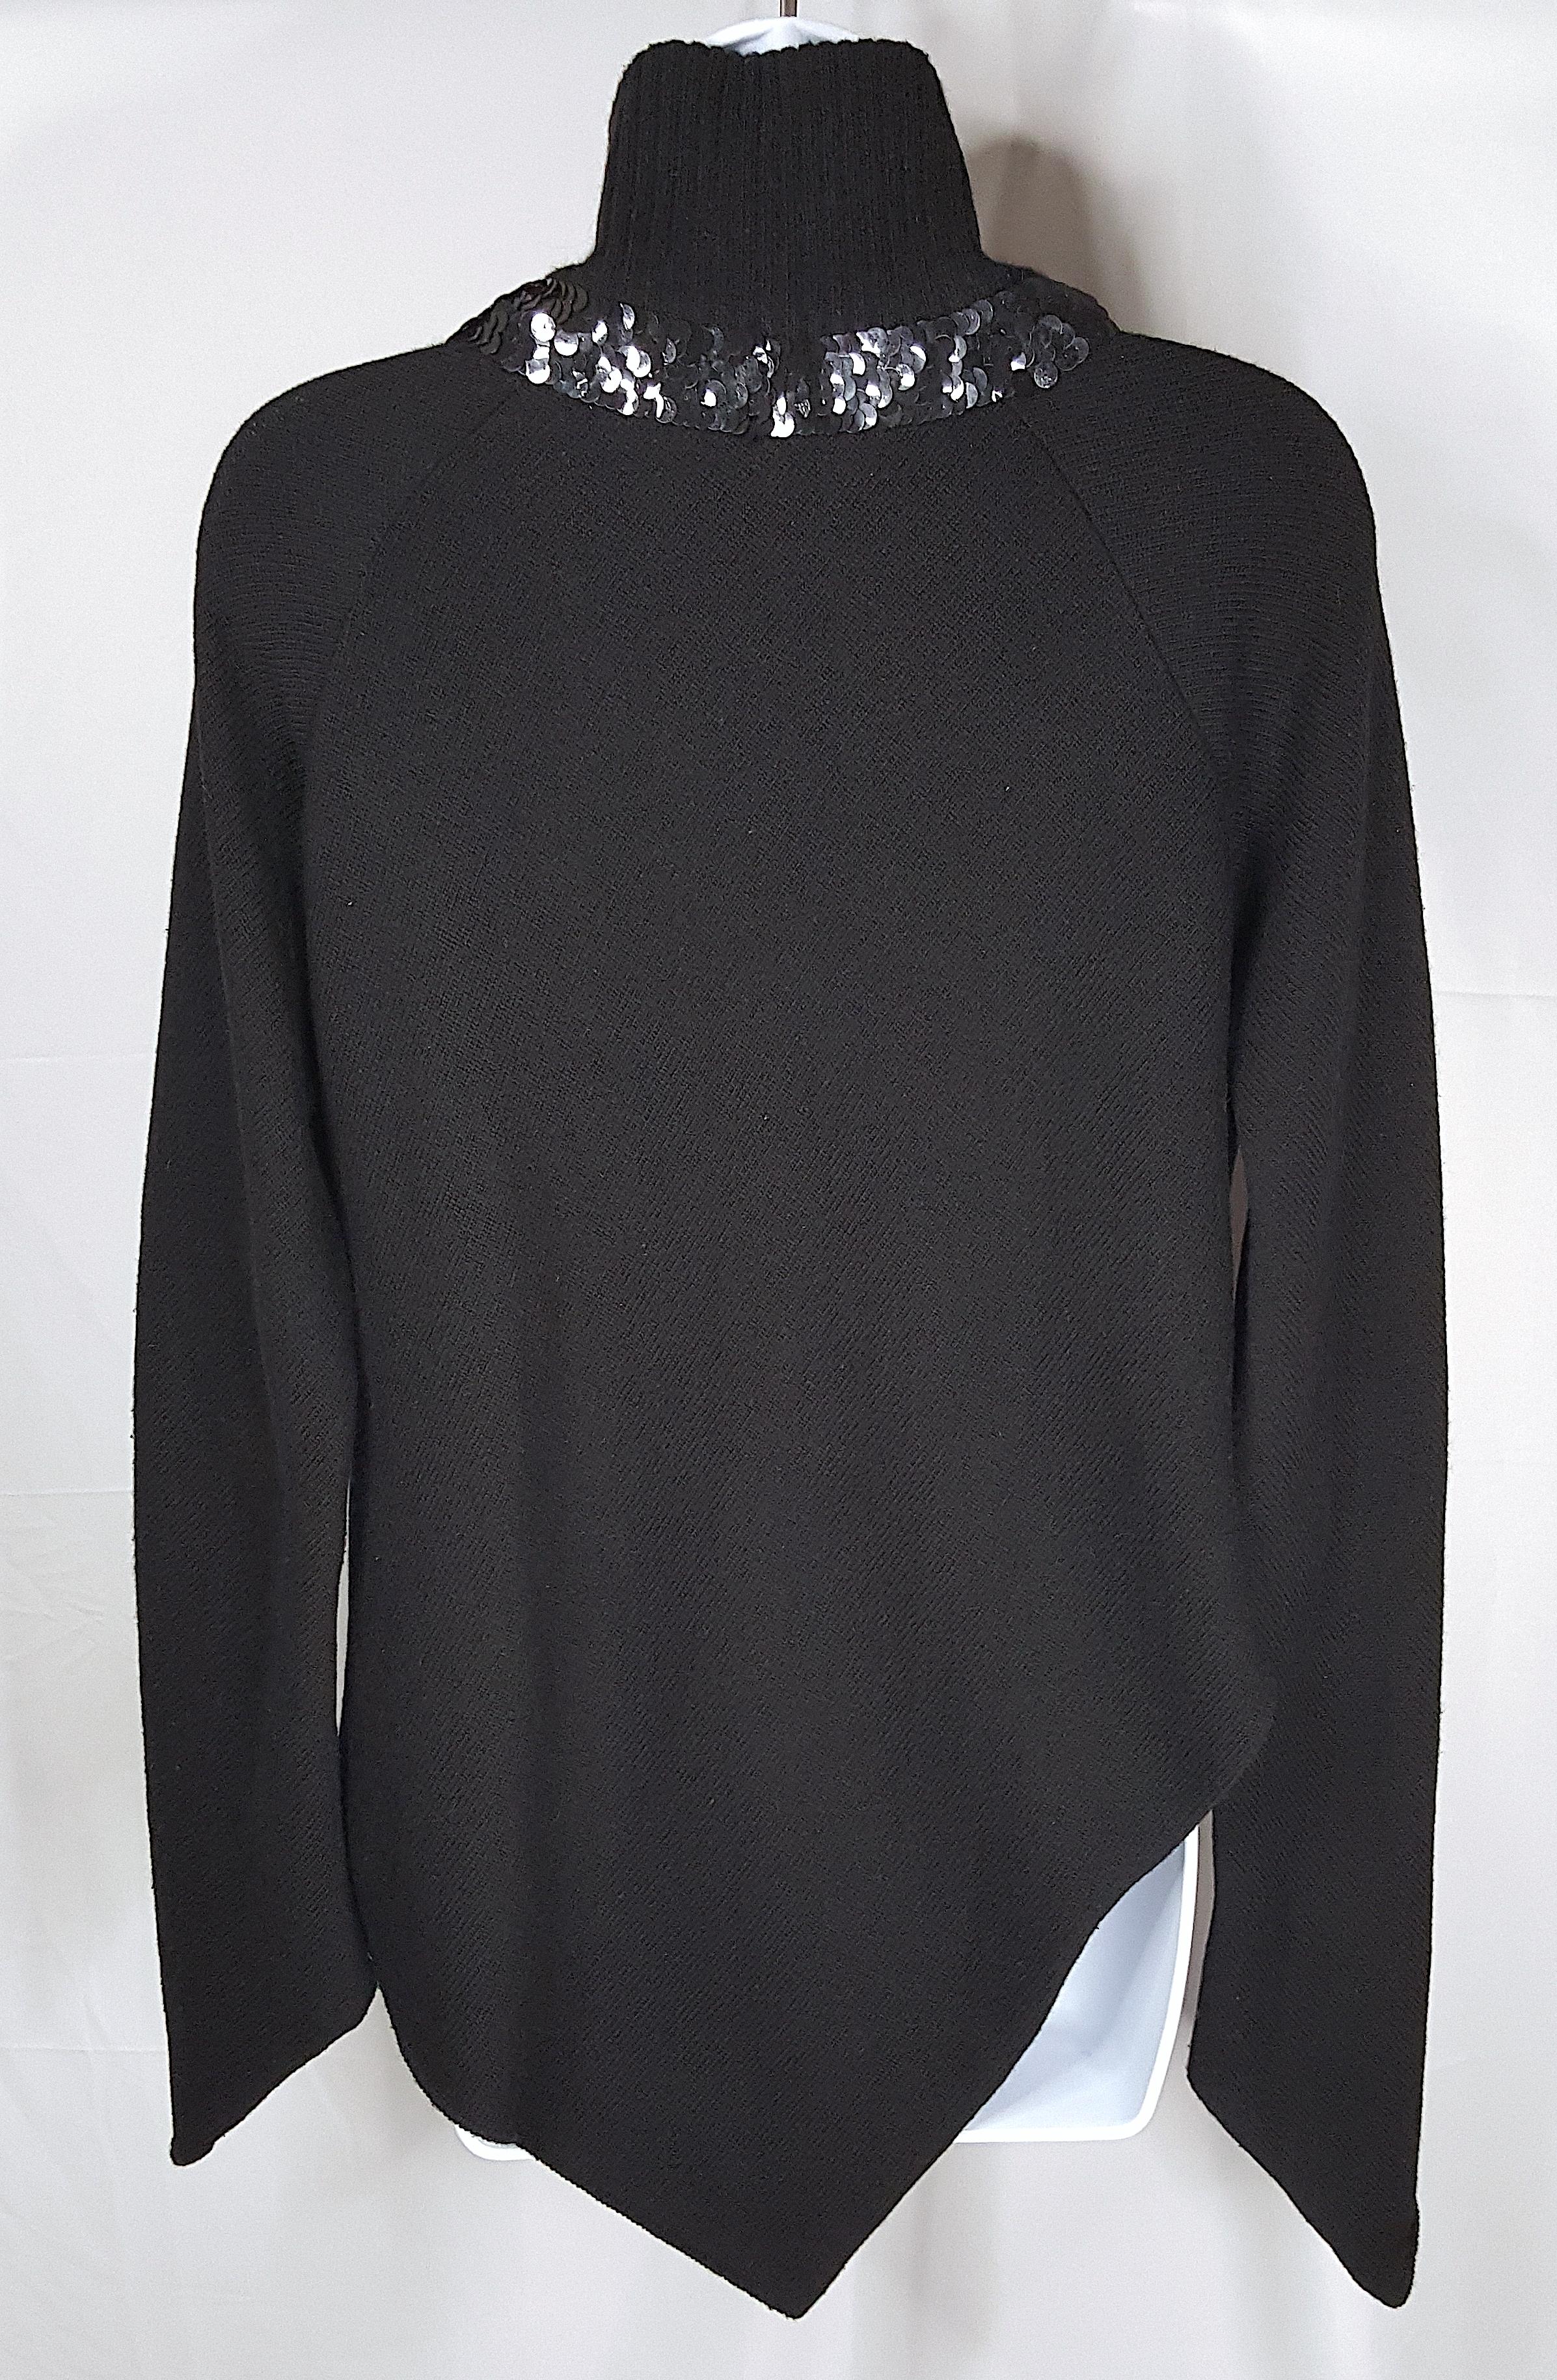 Uniquely designed as couture by French Jean Charles de Castelbajac in the 1980s, this oversized soft cashmere-viscose-wool bias-cut Italian-knit black sweater with made-in-France tuxedo-like hand-sewn sequin trim is a pullover with V-shaped rolled